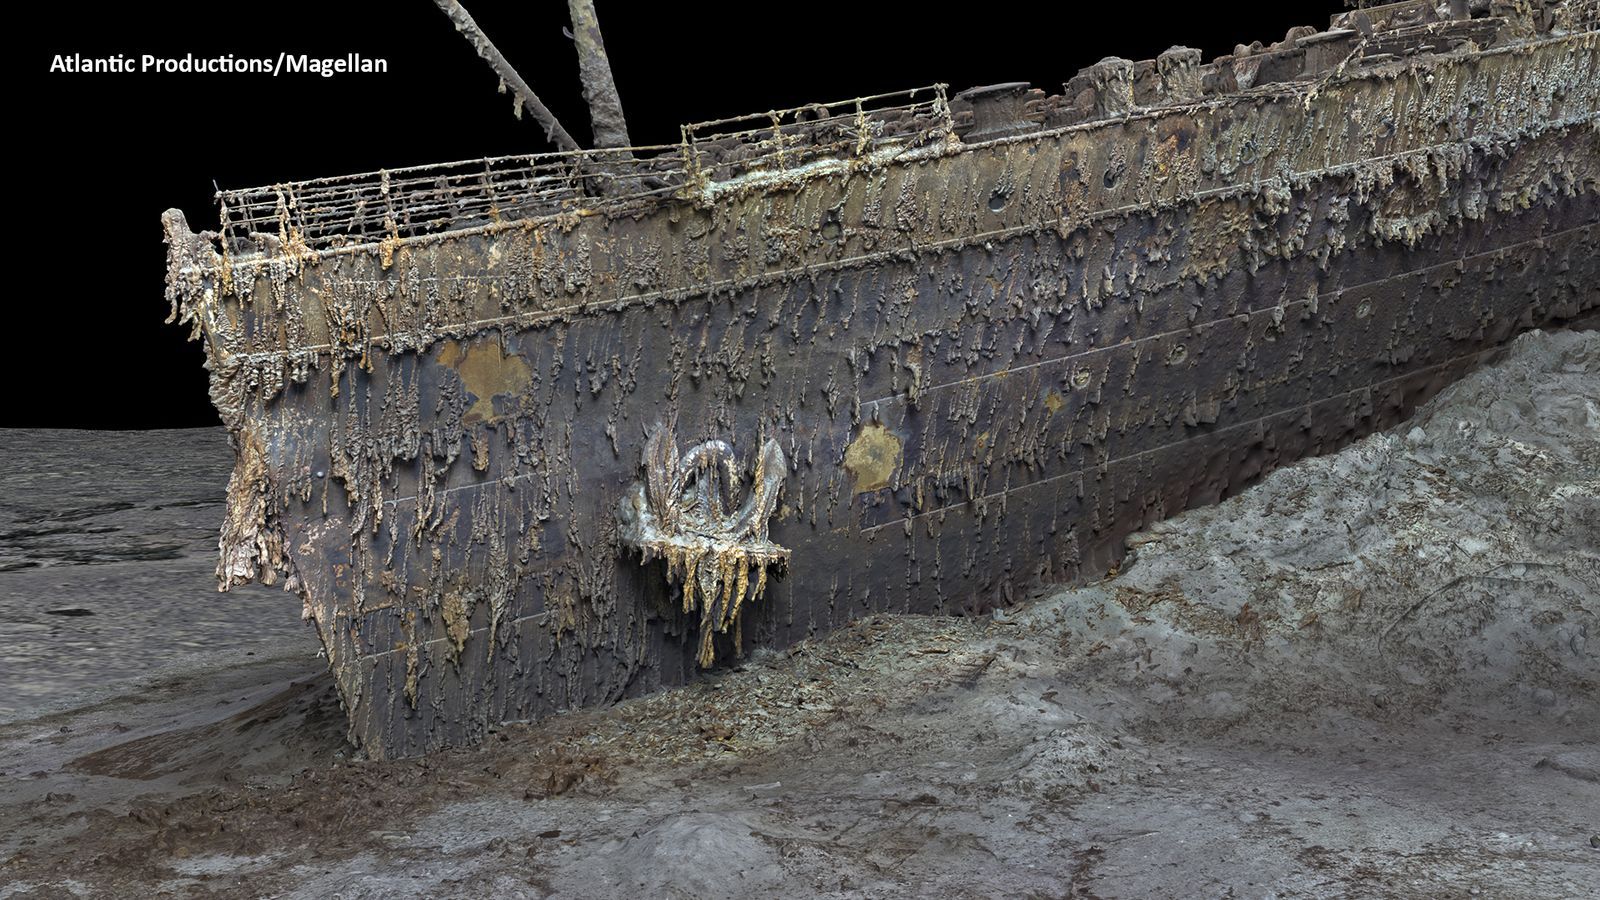 New Digital Scan of Titanic Reveals Wreck in Stunning Detail